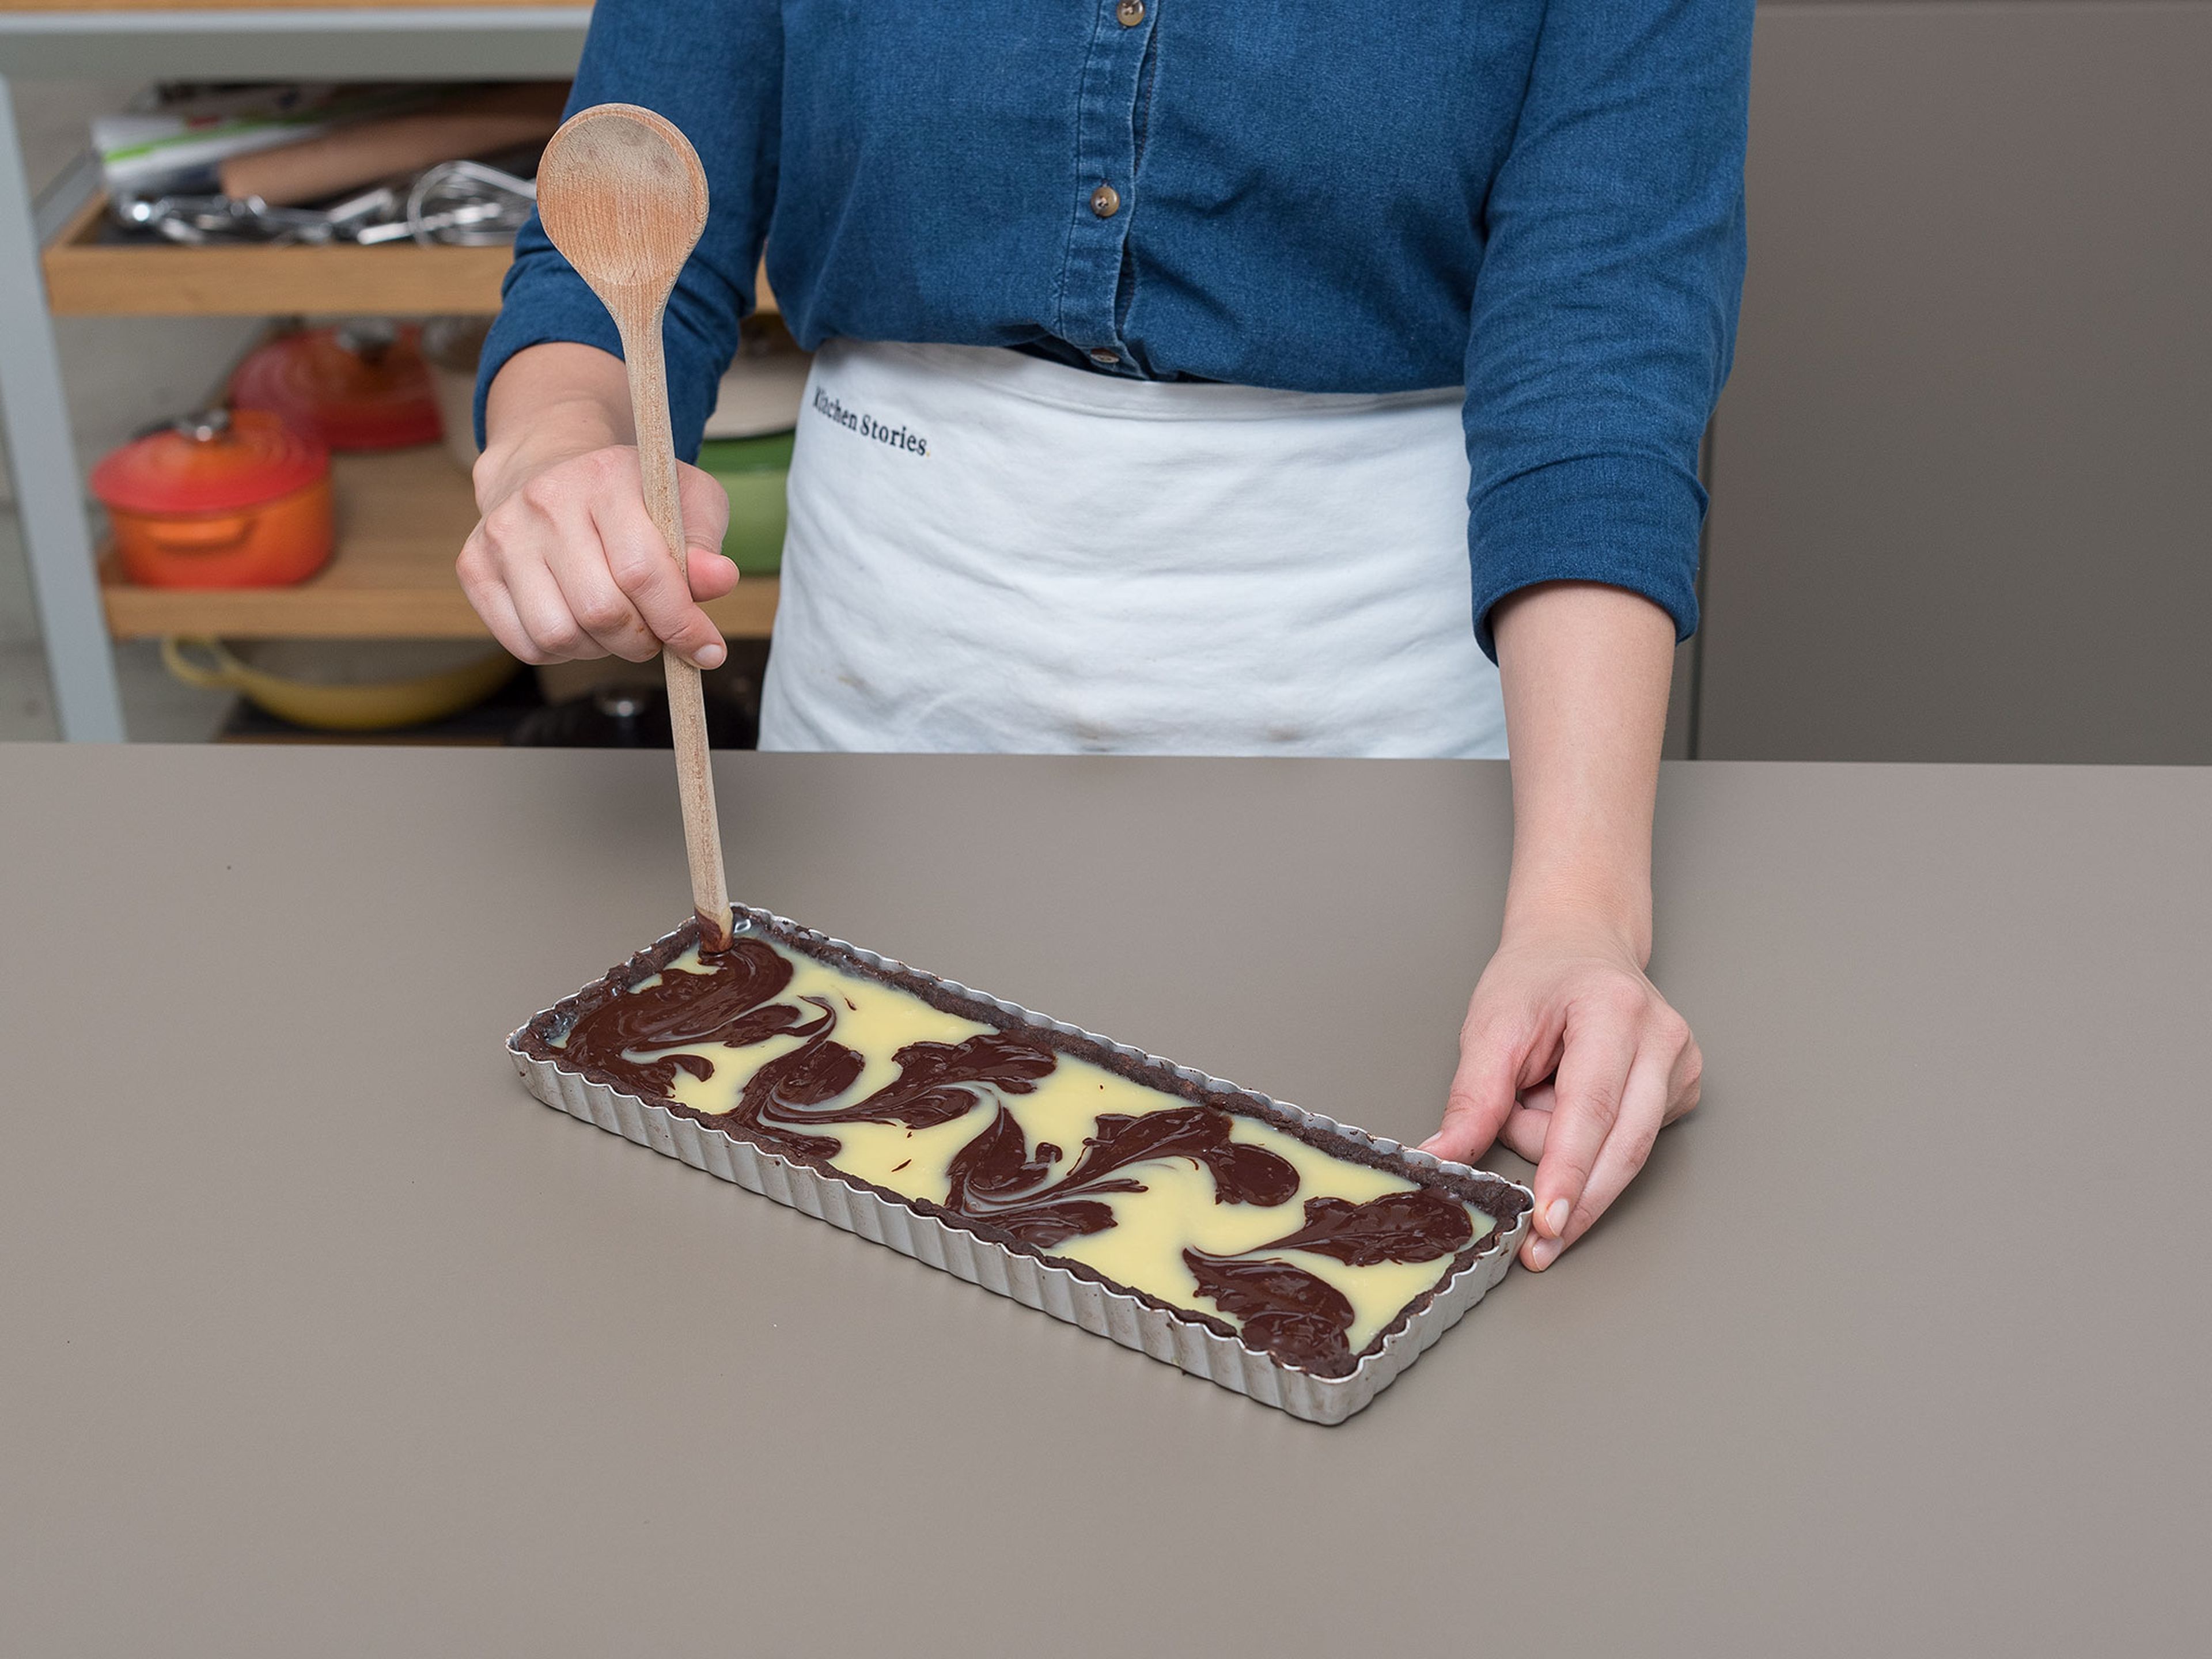 Add dark chocolate to pie dish, then white chocolate on top. Swirl dark chocolate through white, using the end of a cooking spoon, to create a marbled effect. Refrigerate for approx. 10 min.